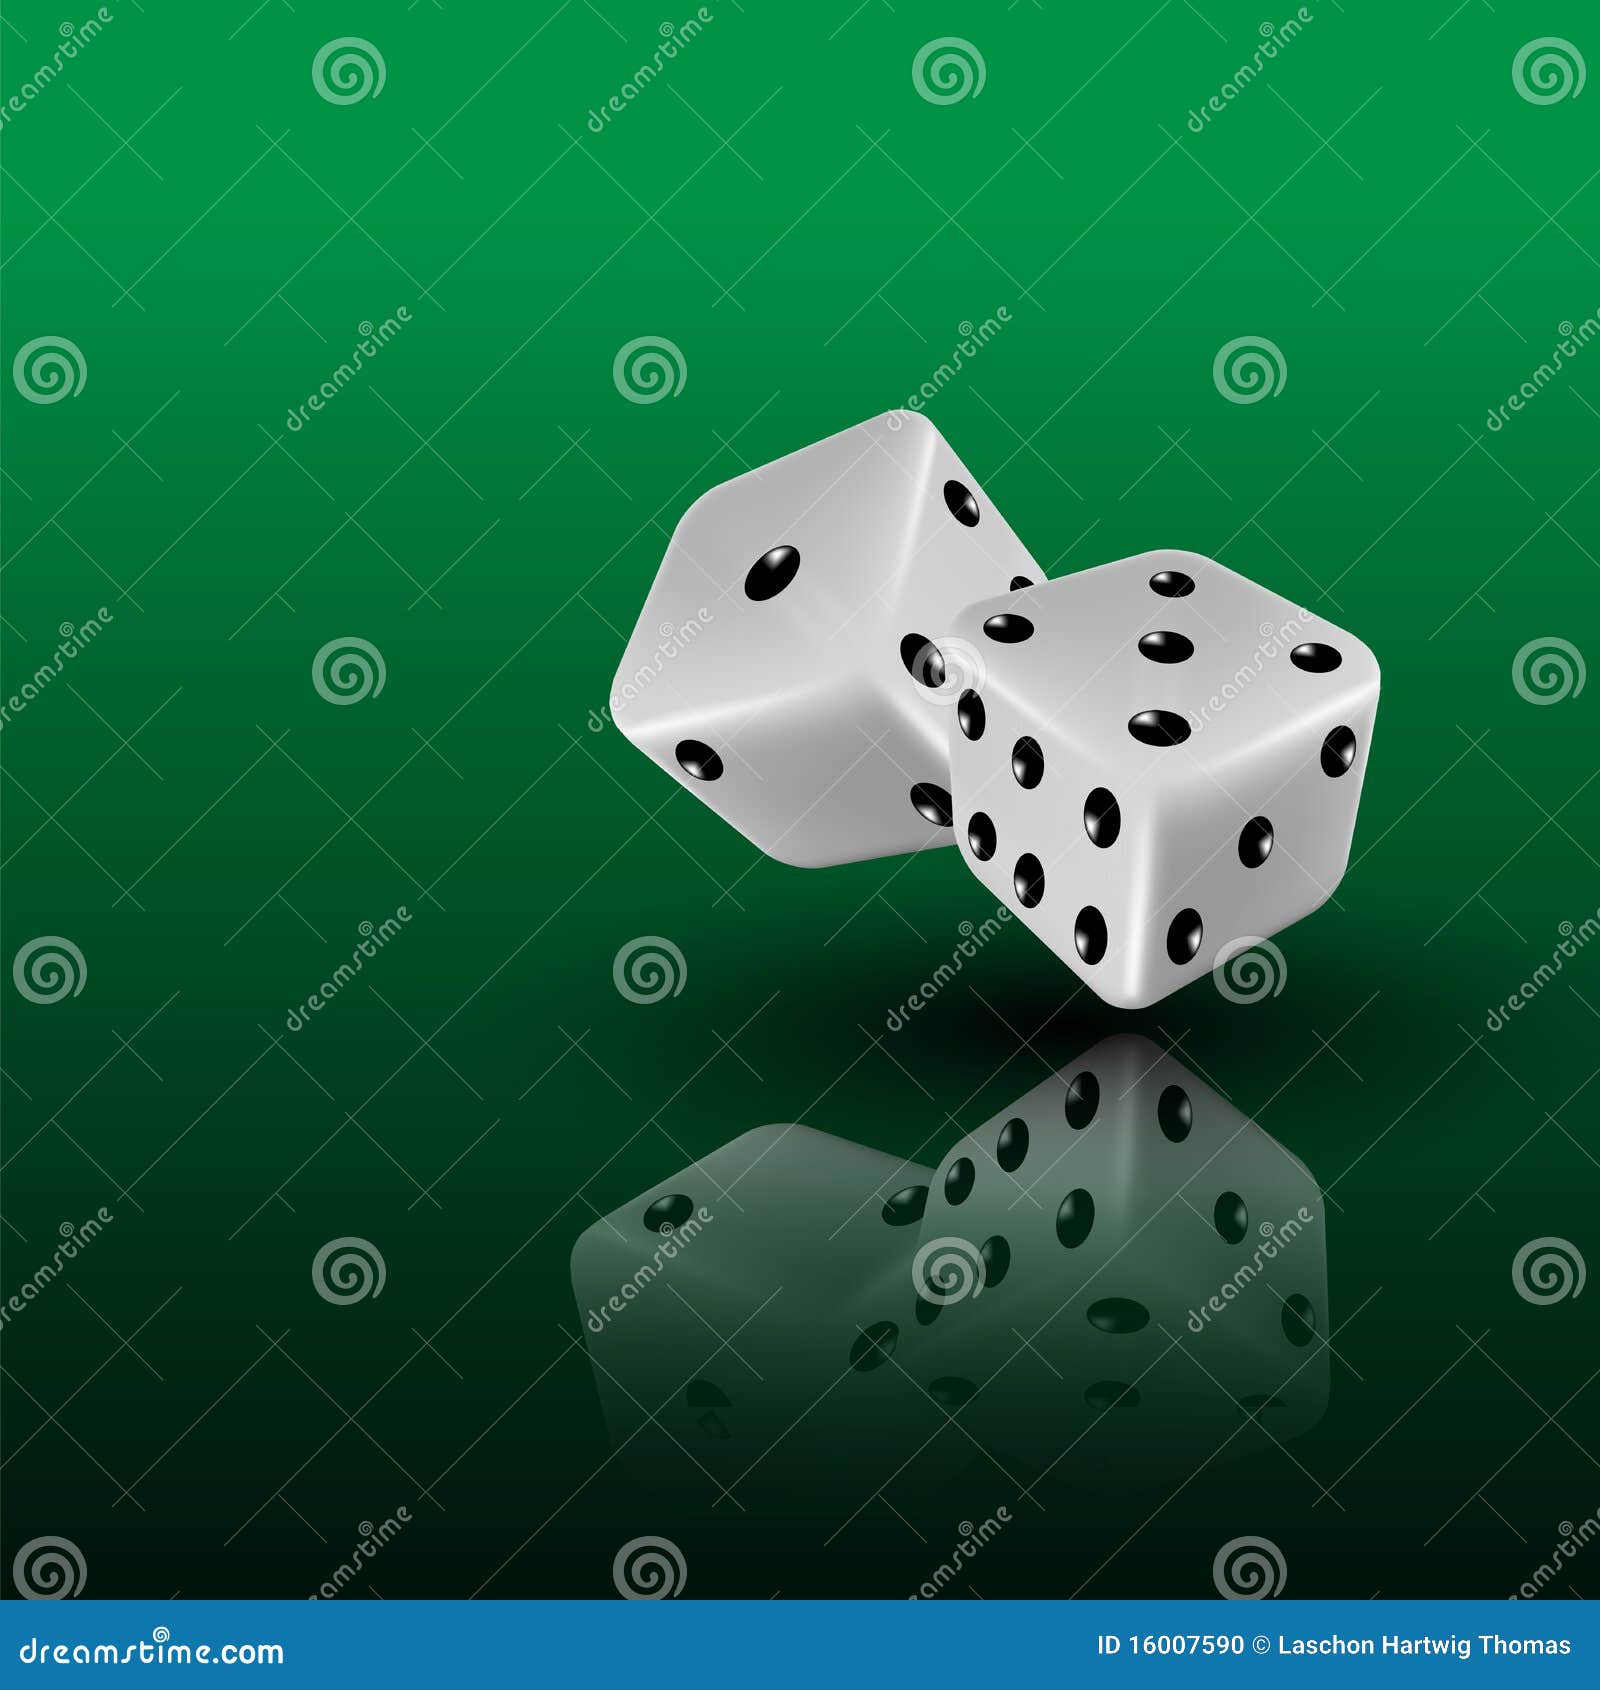 green dice clipart - photo #38